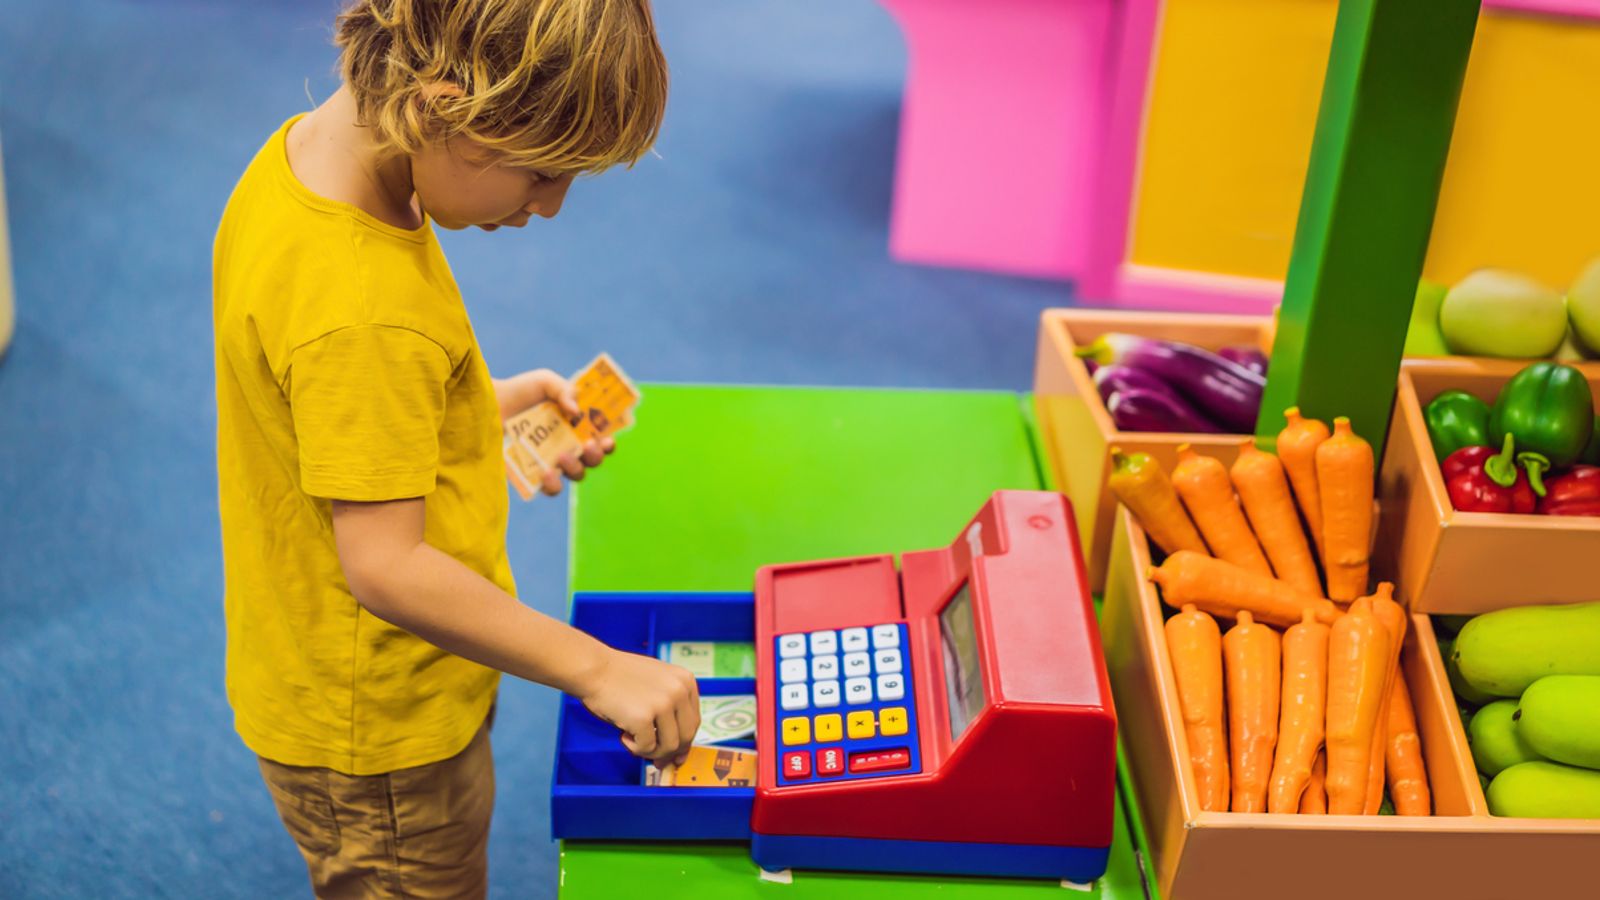 free childcare plan risks lowering standards, report finds